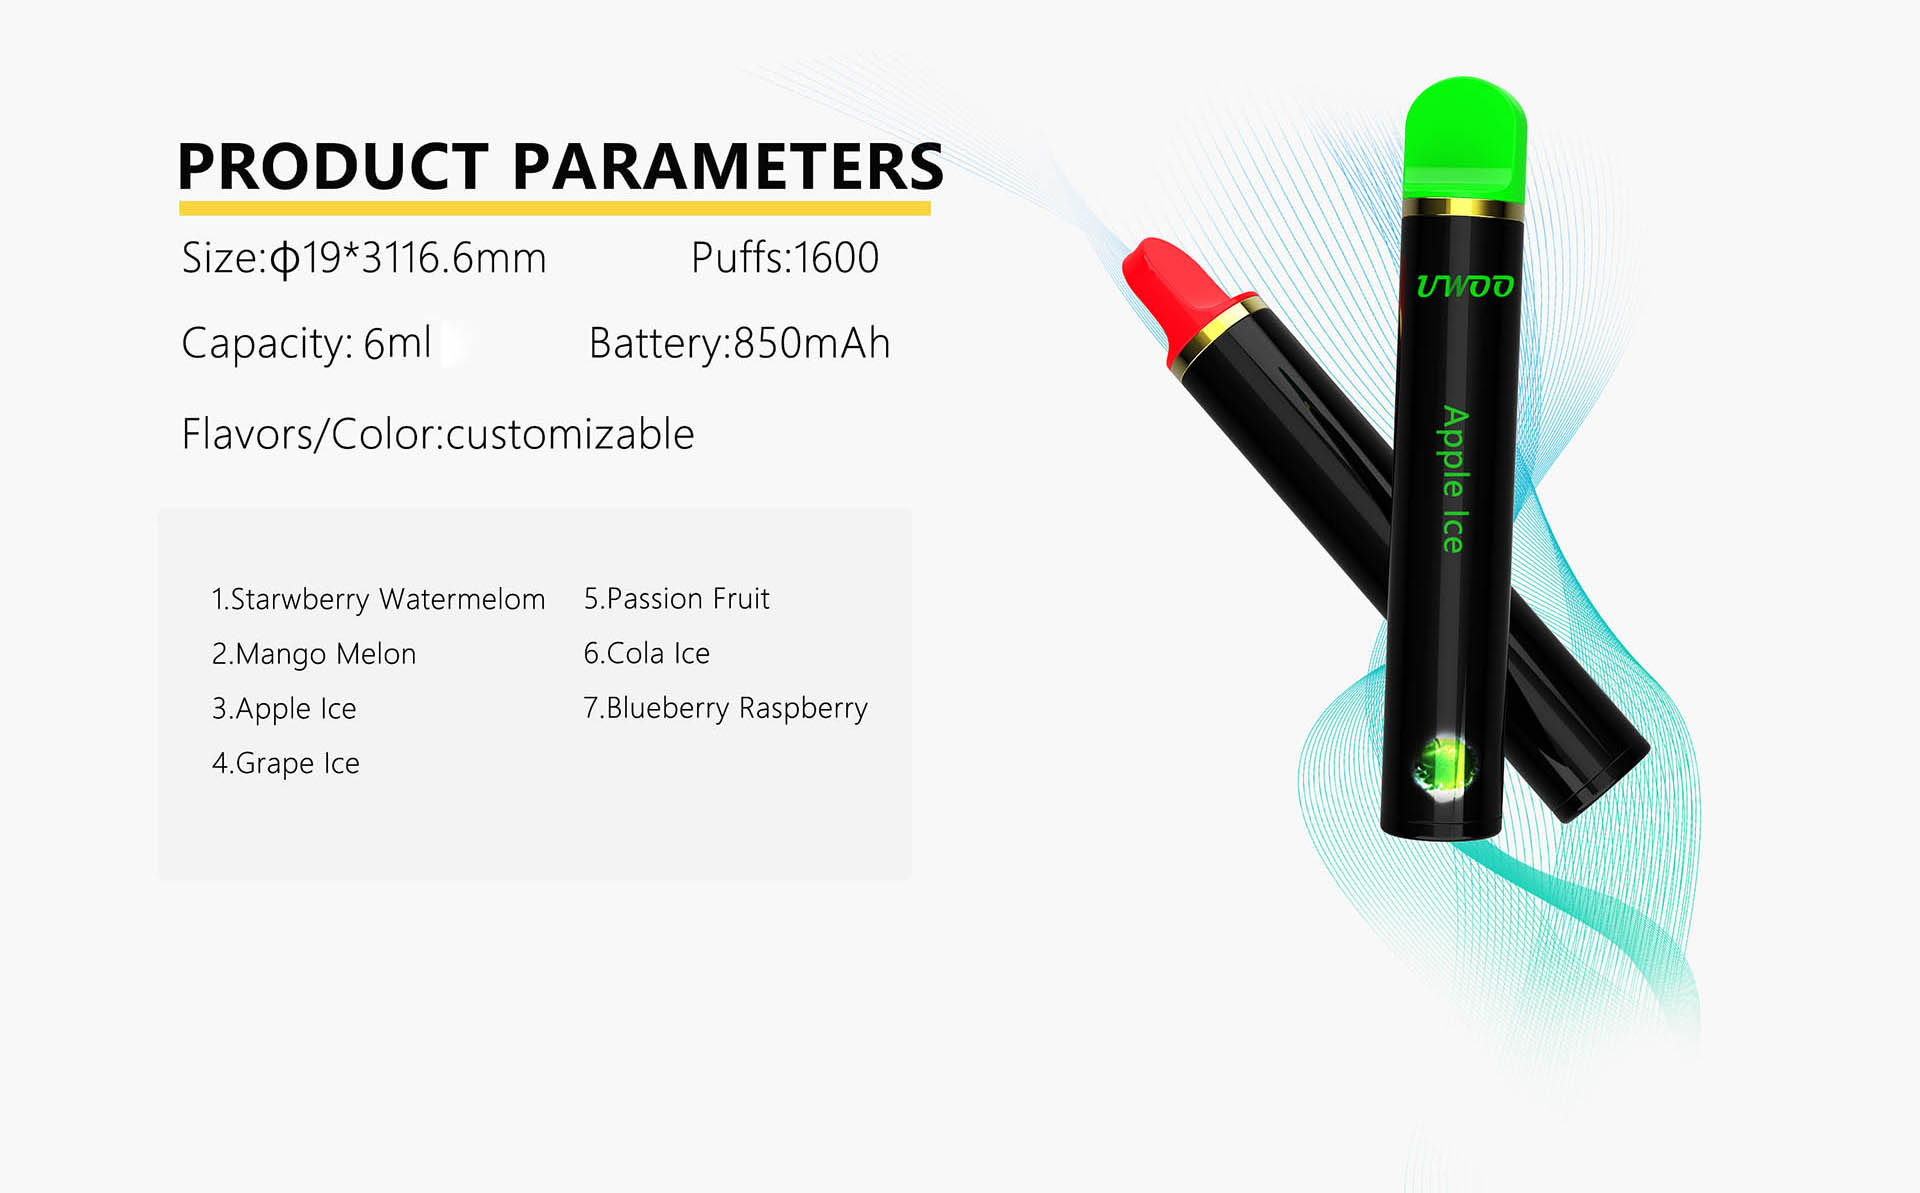 PRODUCT PARAMETERS Size:Φ19*3116.6mm Puffs:1600 Capacity: 6ml Battery:850mAh Flavors/Color: customizable 1.Starwberry Watermelom 2.Mango Melon 3. Apple lce 4.Grape Ice 5.Passion Fruit 6.Cola Ice 7.Blueberry Raspberry